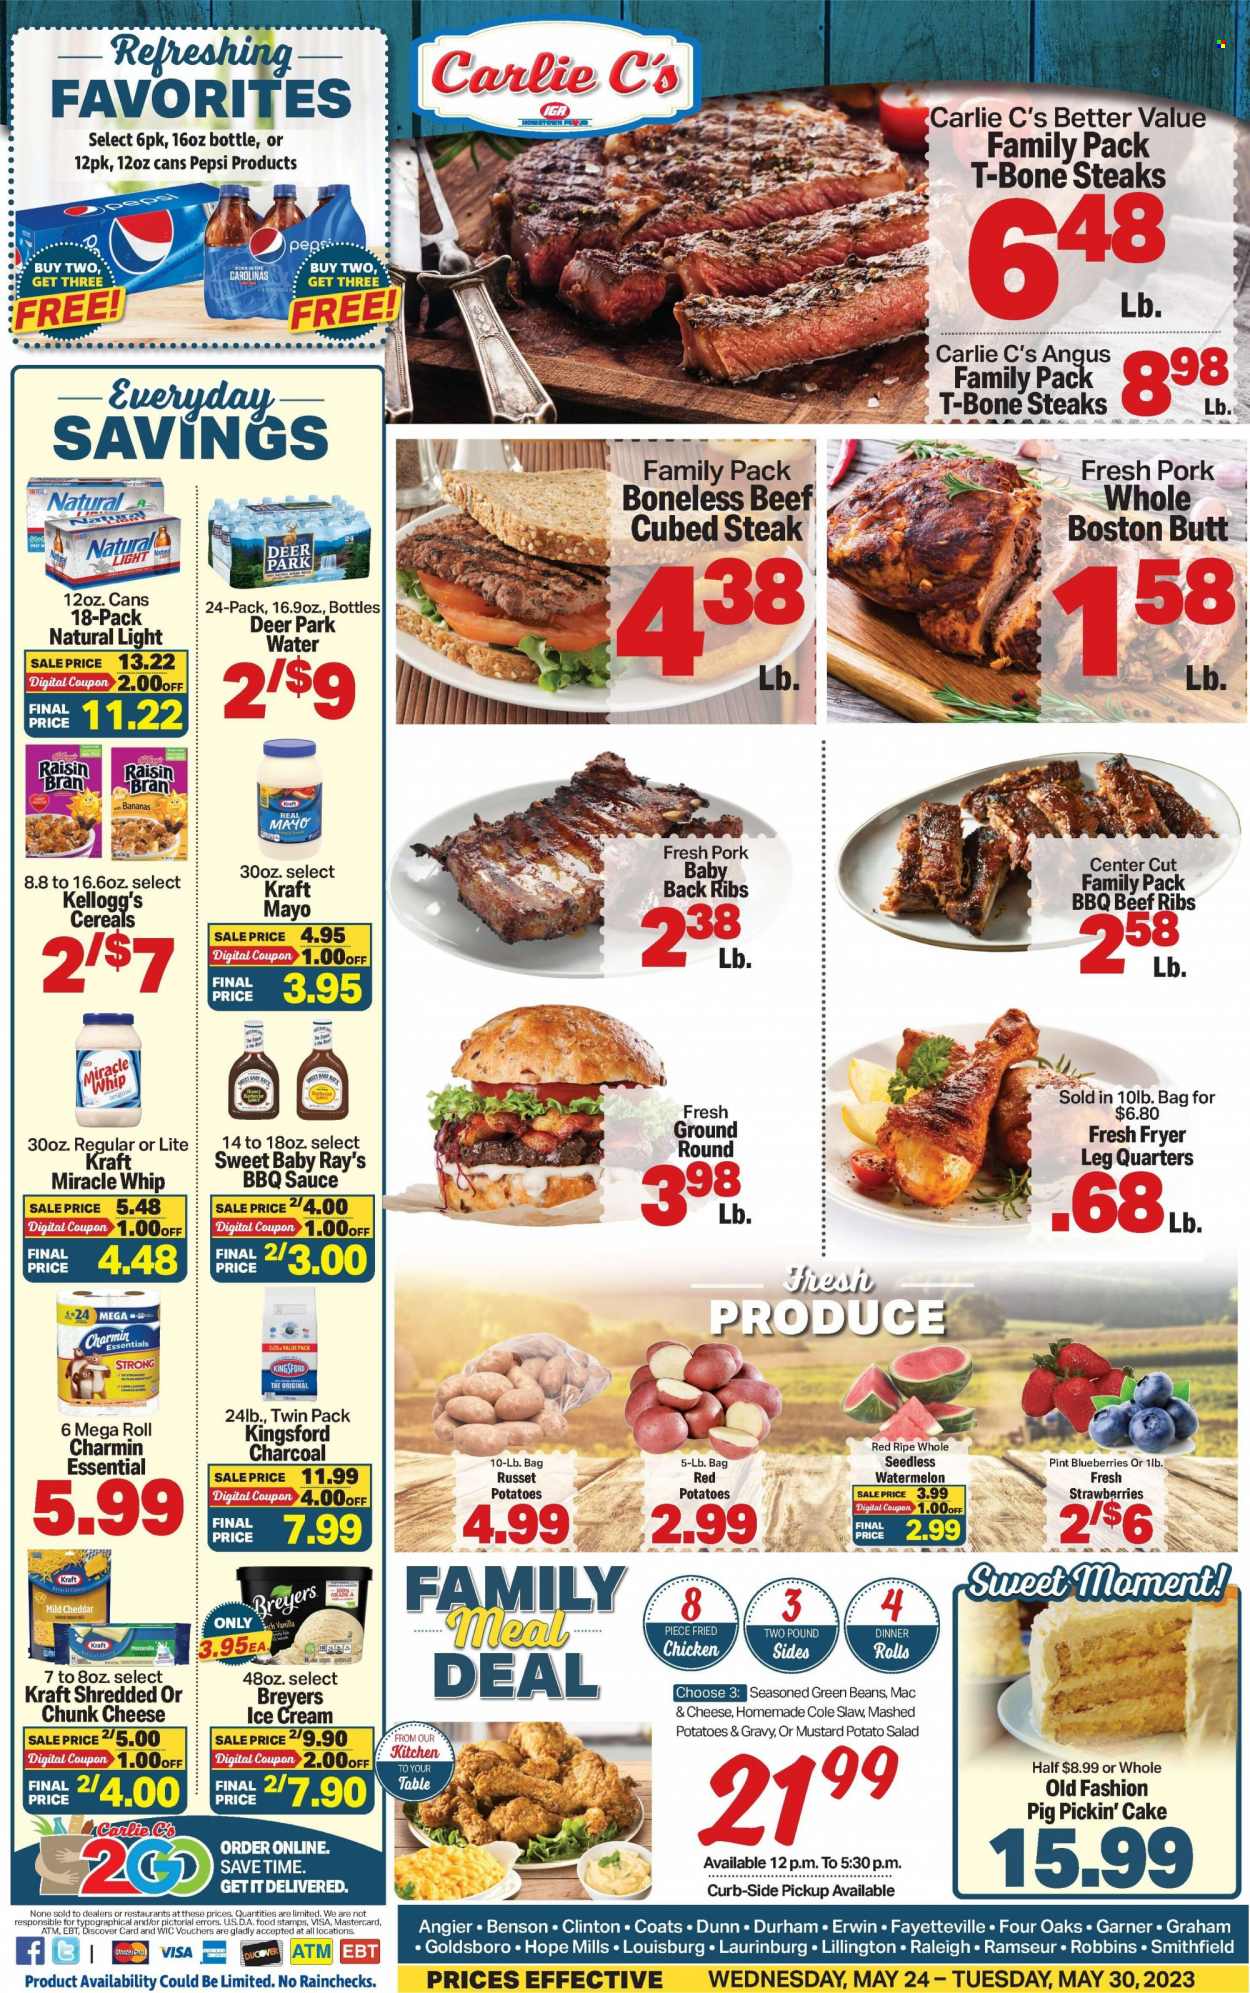 thumbnail - Carlie C's Flyer - 05/24/2023 - 05/30/2023 - Sales products - cake, dinner rolls, beans, green beans, russet potatoes, salad, red potatoes, blueberries, strawberries, watermelon, mashed potatoes, sauce, fried chicken, Kraft®, Kingsford, boston butt, potato salad, mild cheddar, mozzarella, shredded cheese, cheddar, chunk cheese, mayonnaise, Miracle Whip, ice cream, Kellogg's, cereals, Raisin Bran, BBQ sauce, mustard, Pepsi, soft drink, water, beef meat, beef ribs, t-bone steak, steak, ribs, pork meat, pork ribs, pork back ribs, Charmin. Page 1.